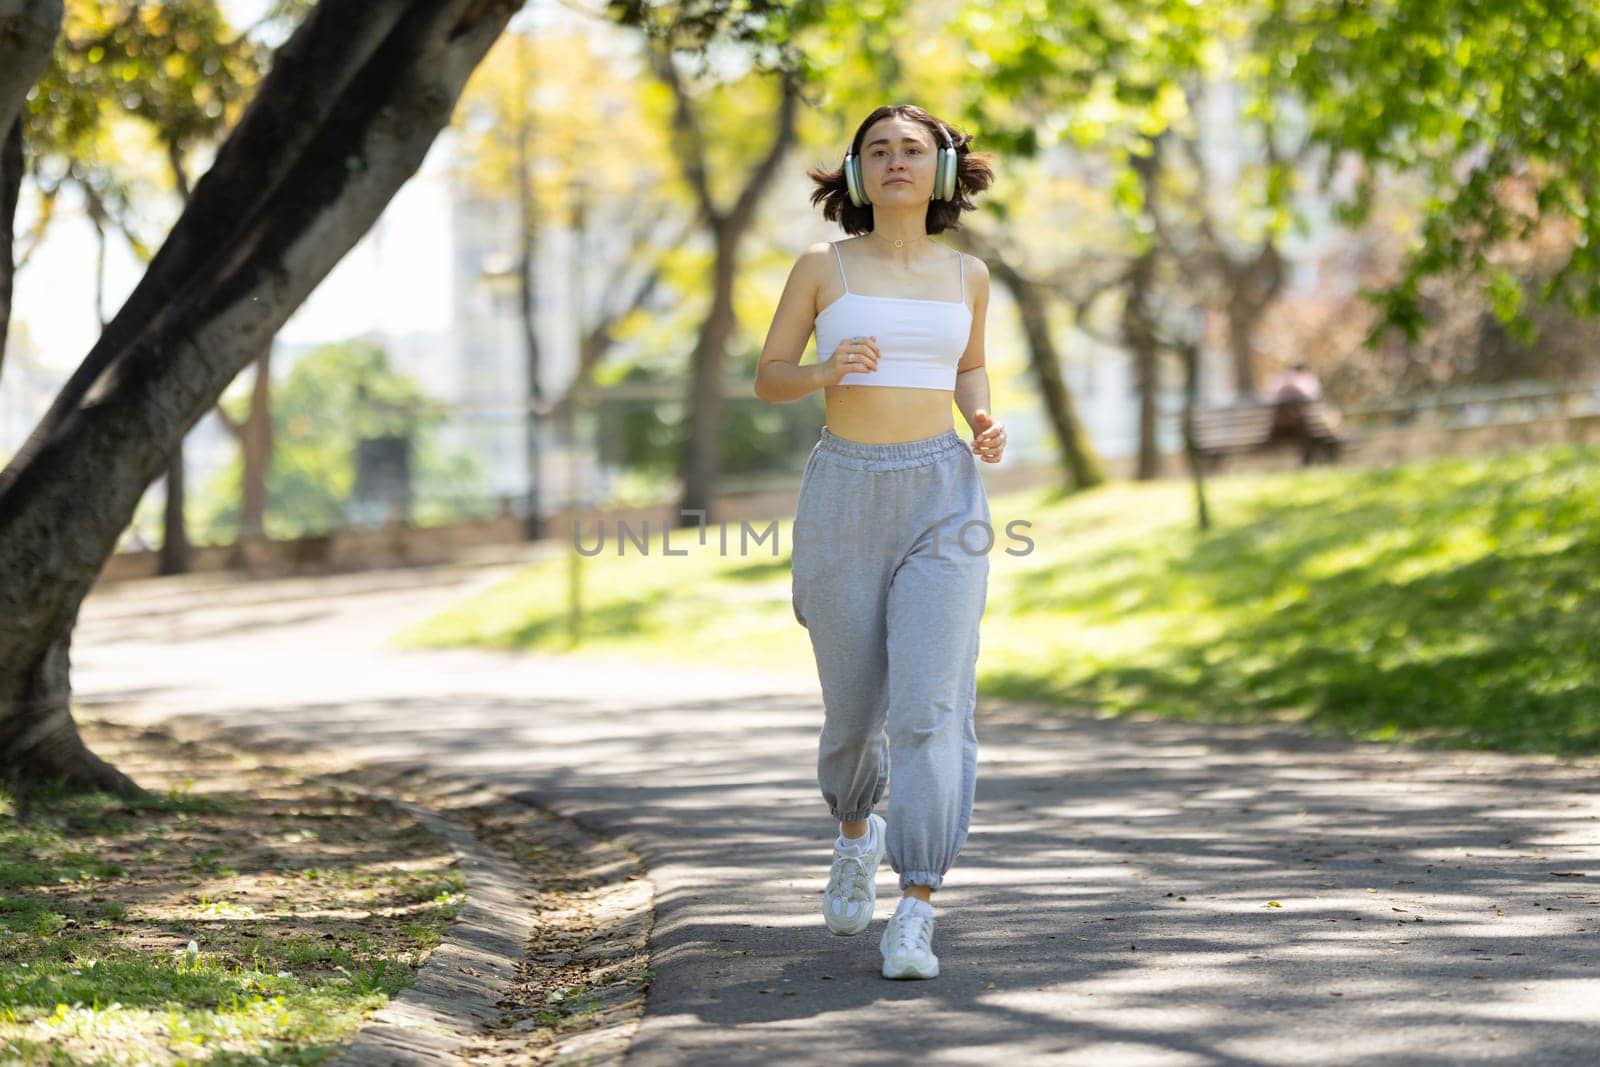 A woman is running in a park with headphones on. She is wearing a white tank top and gray pants